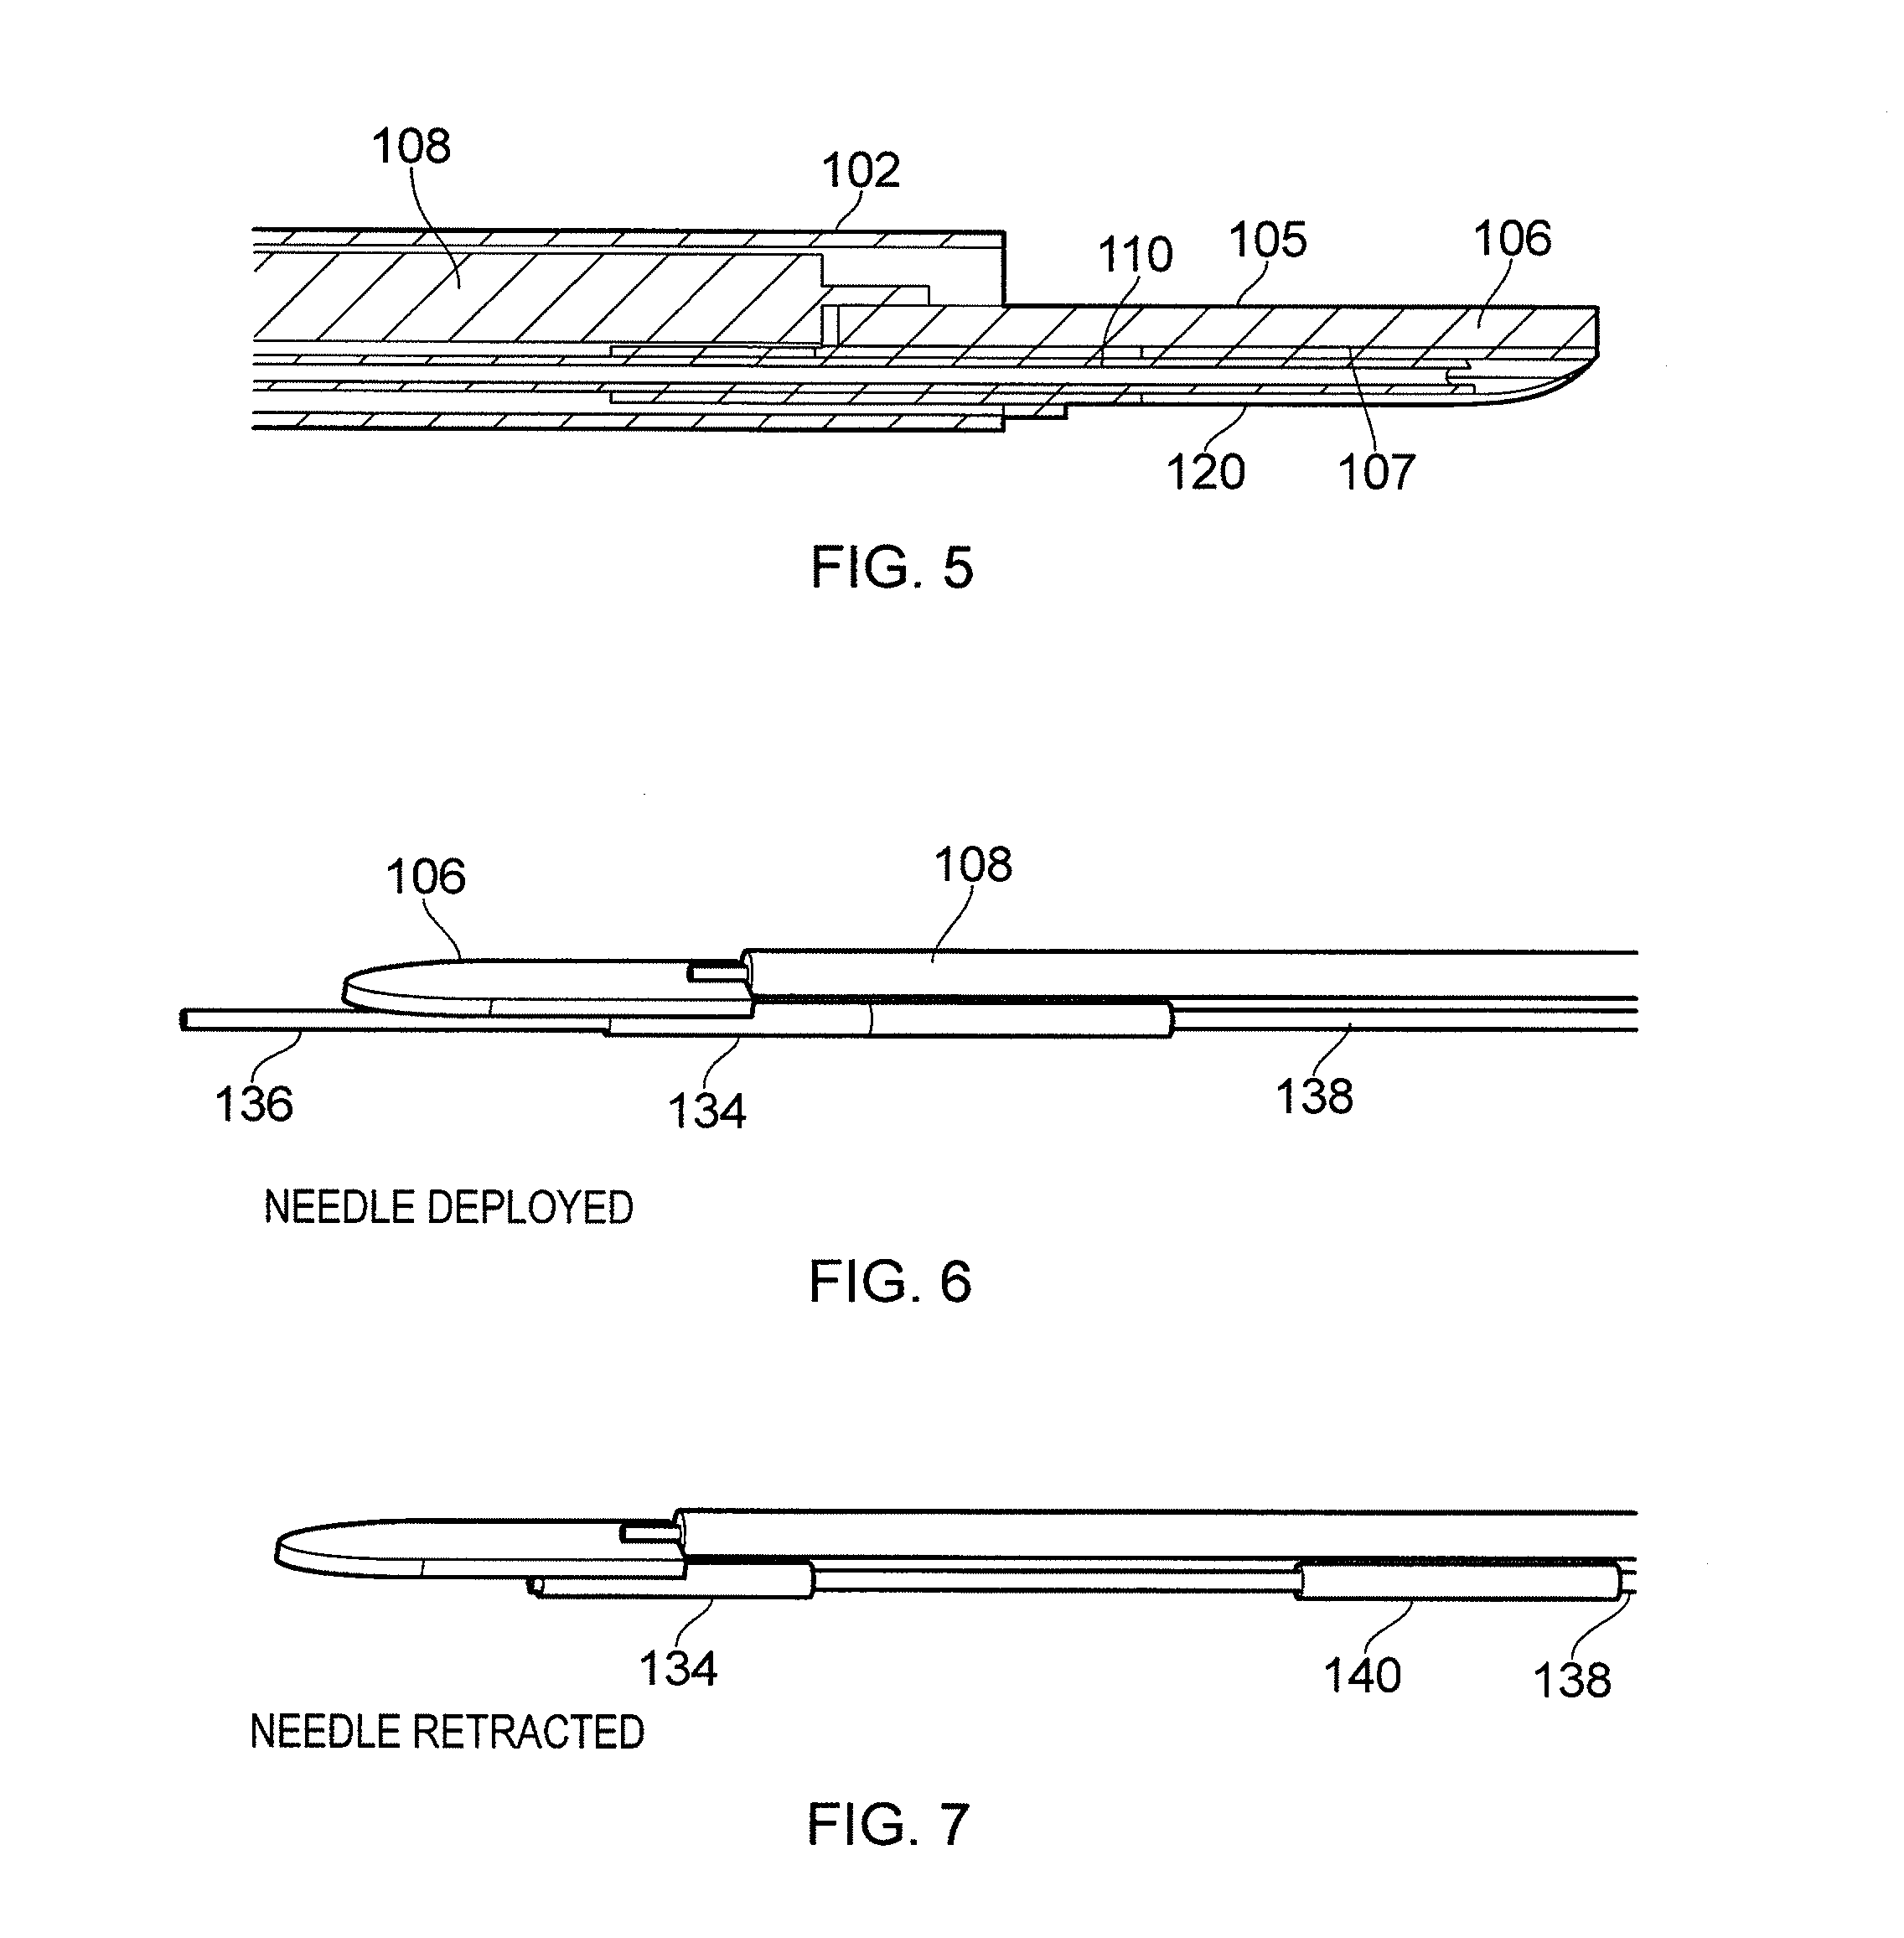 Electrosurgical resection instrument